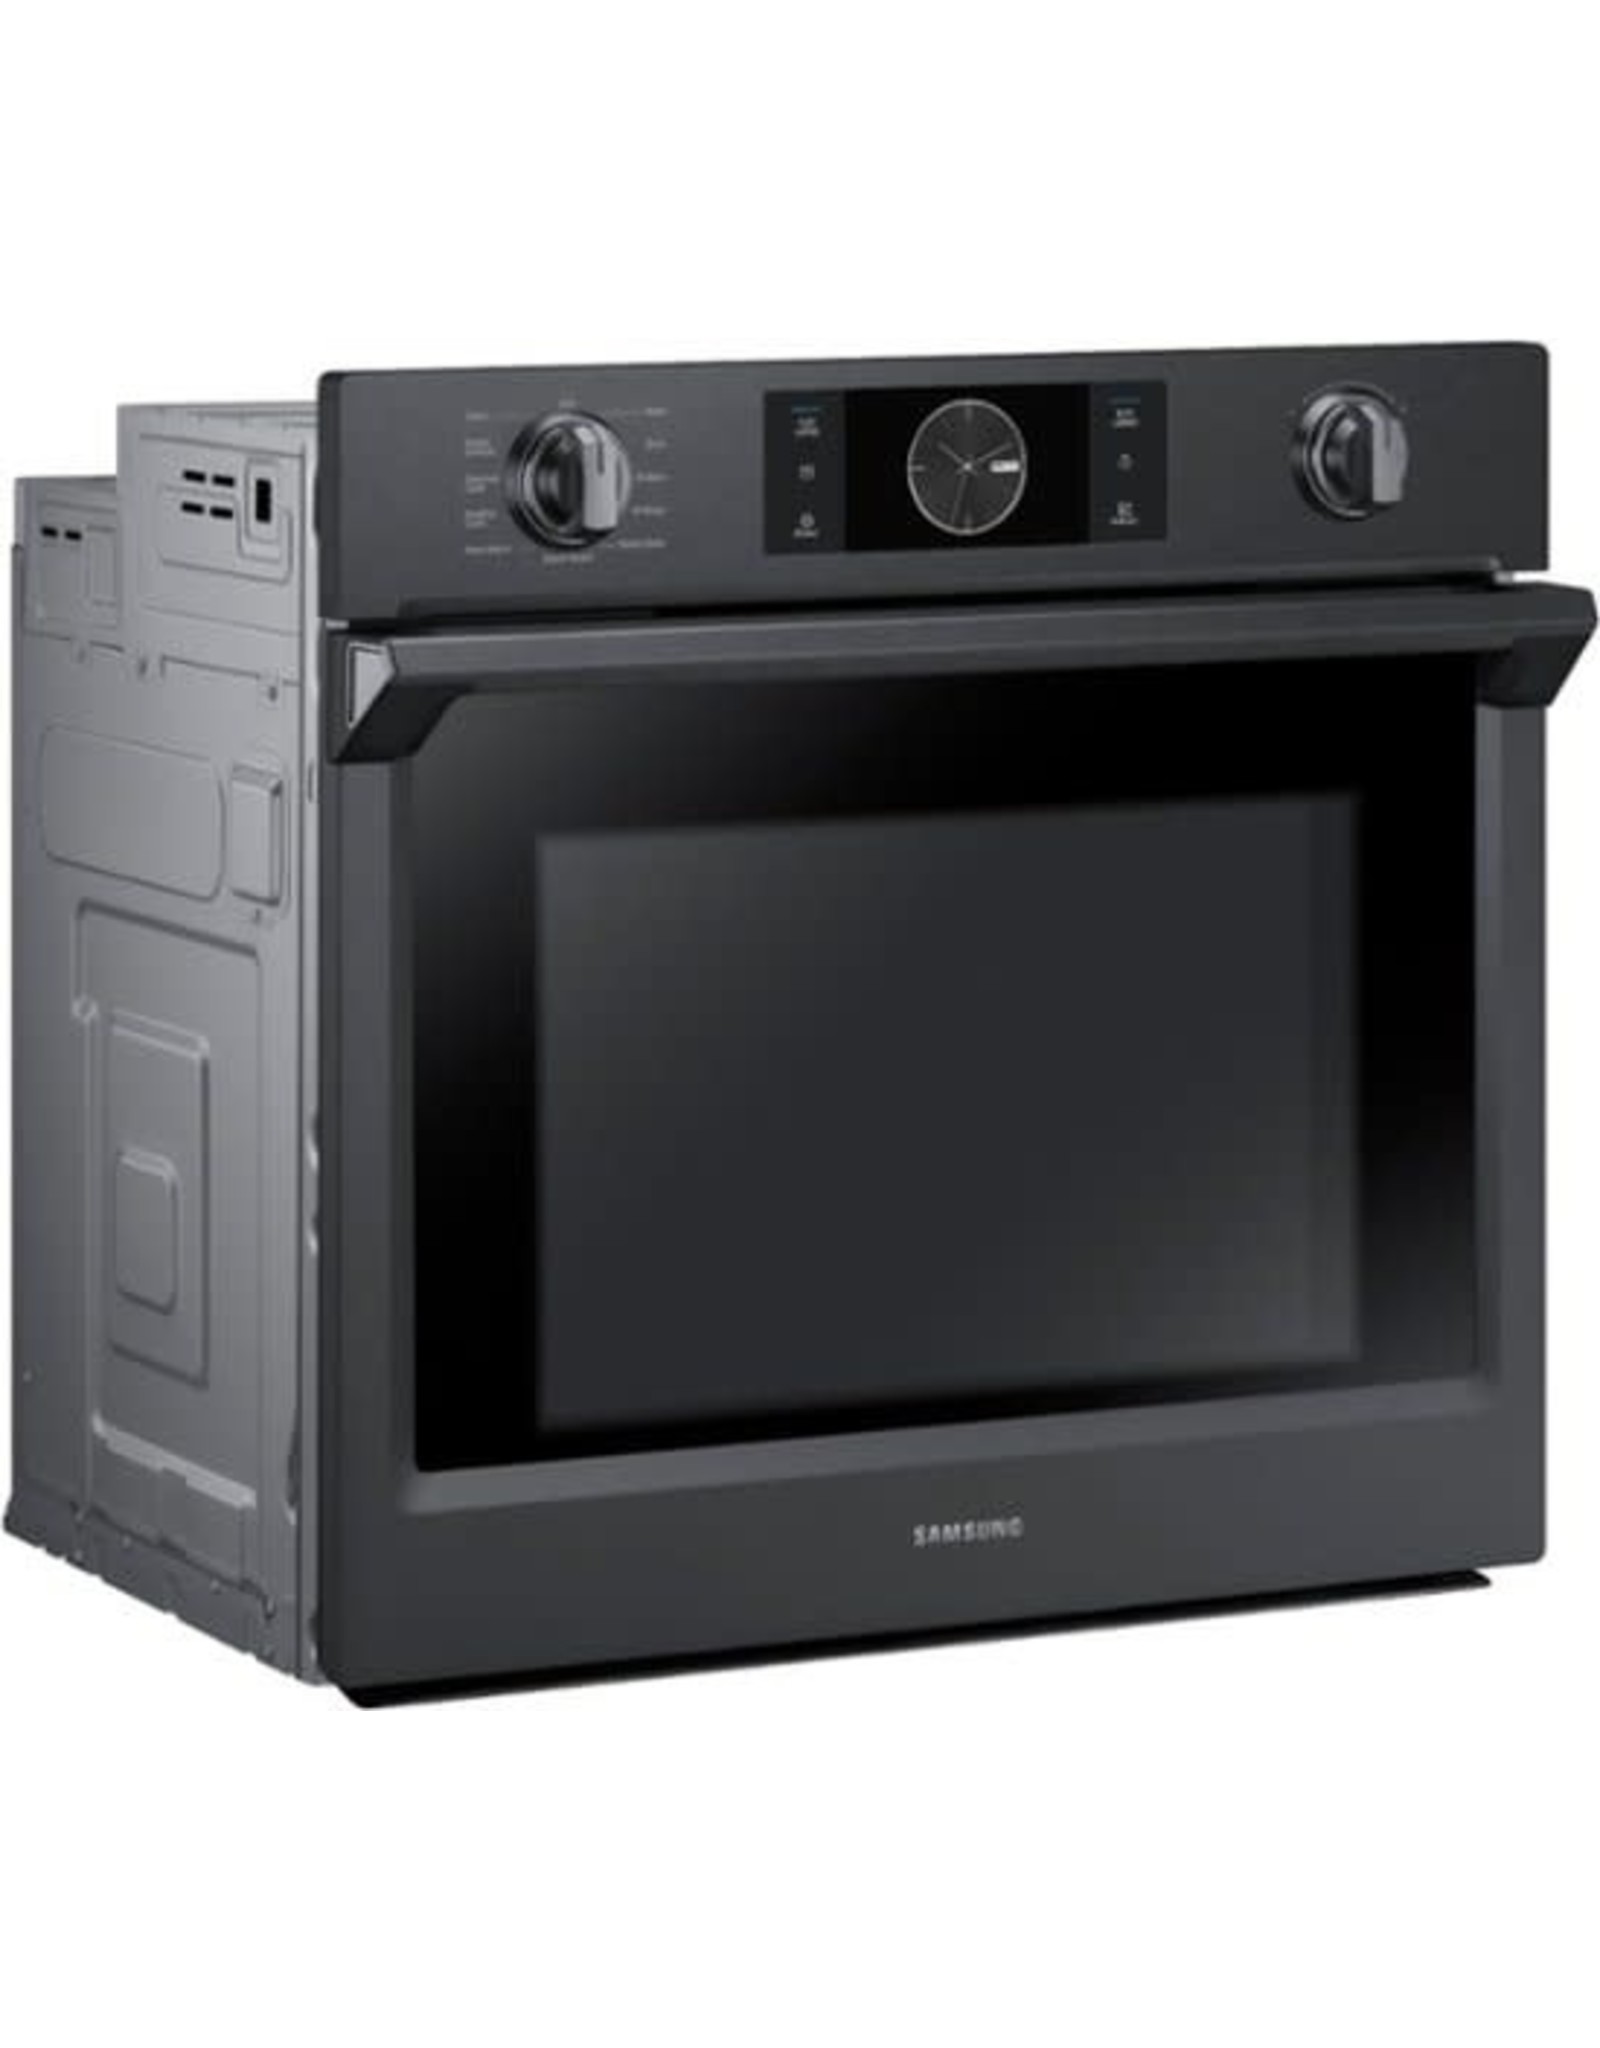 NV51K7770SG  Samsung  Steam Cook with Flex Duo 30-in Self-Cleaning Convection European Element Single Electric Wall Oven (Fingerprint Resistant Black Stainless Steel)